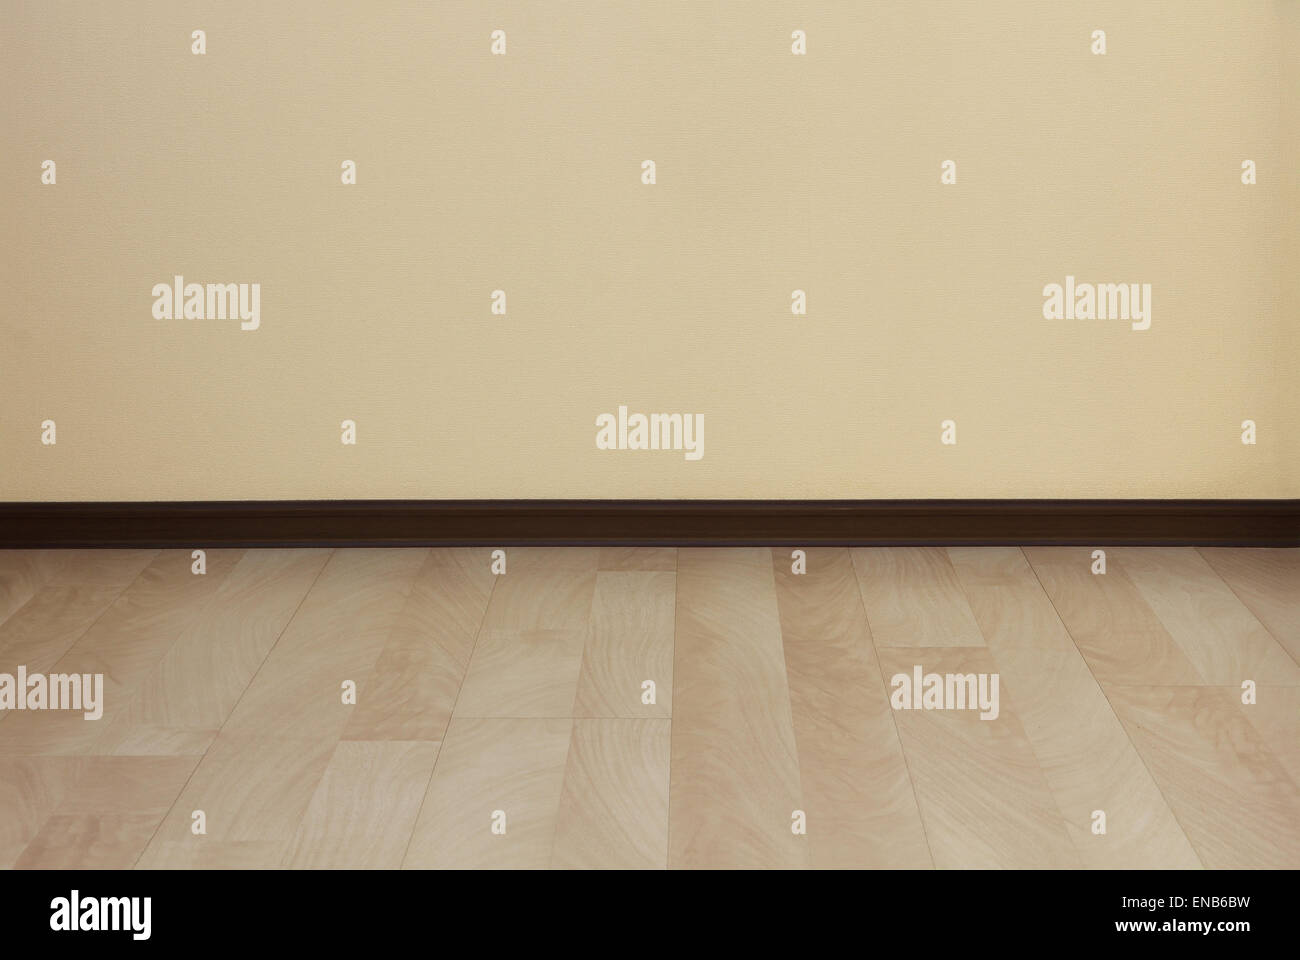 Clean wall and laminate floor as background. Stock Photo